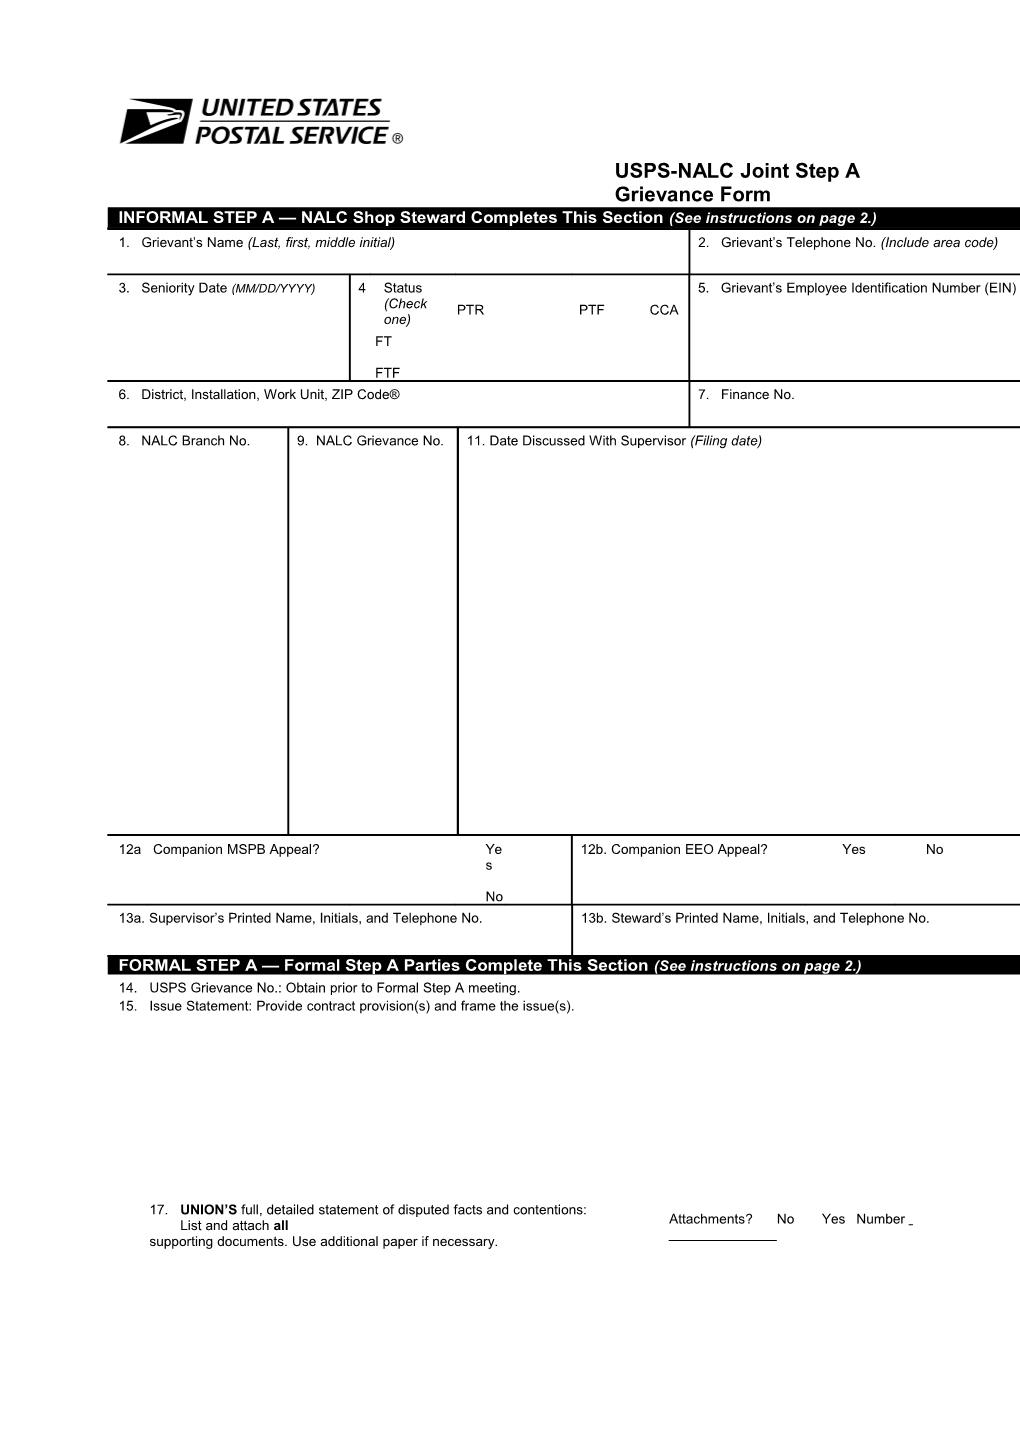 USPS-NALC Joint Step a Grievance Form s1